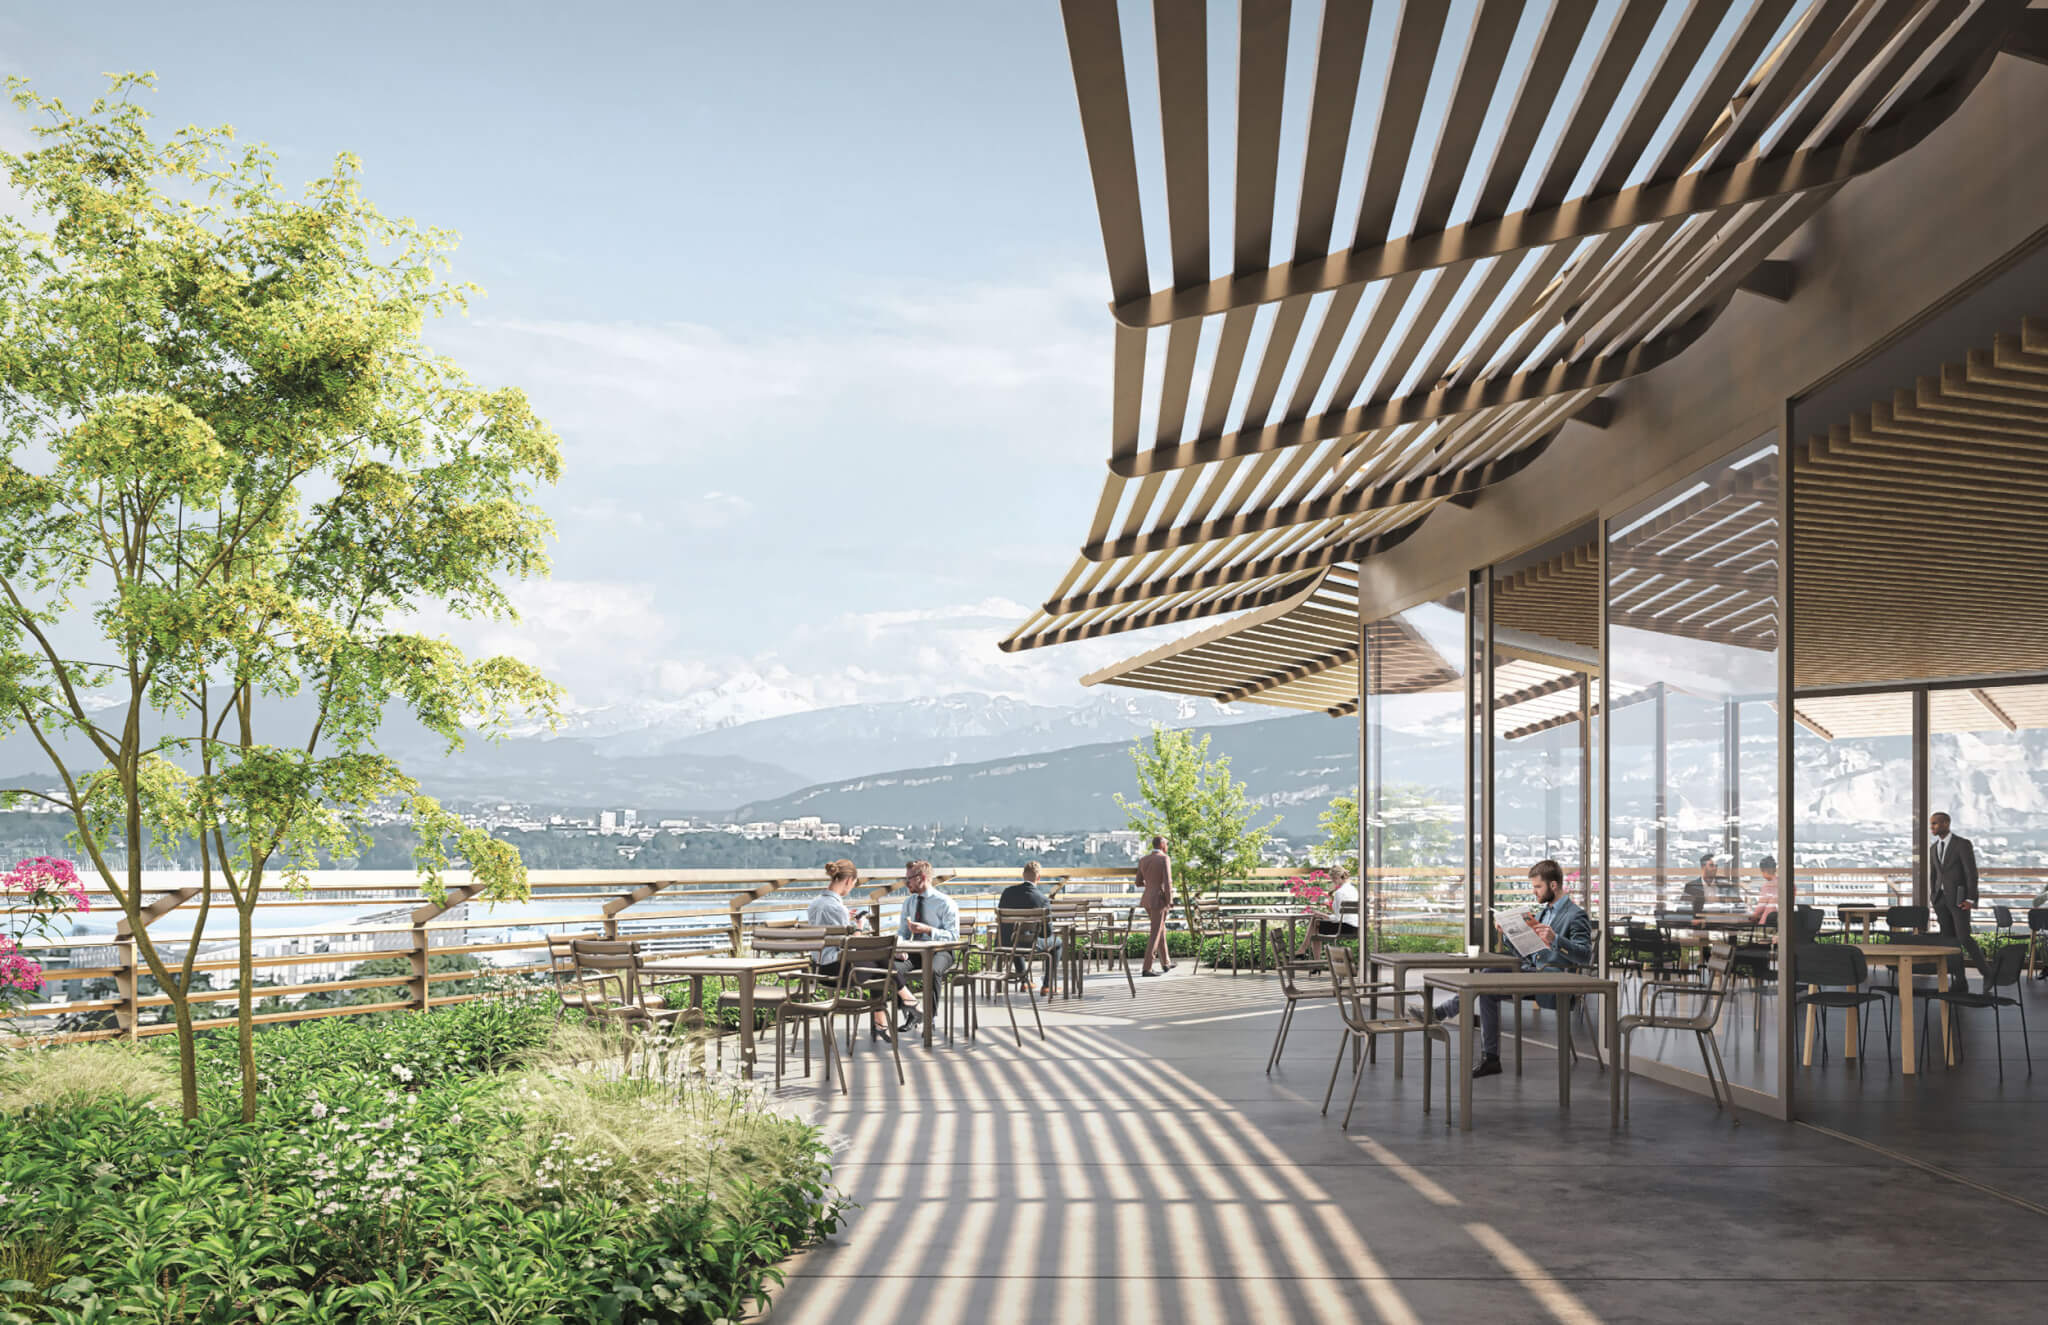 rendering of sweeping deck space with outdoor seating